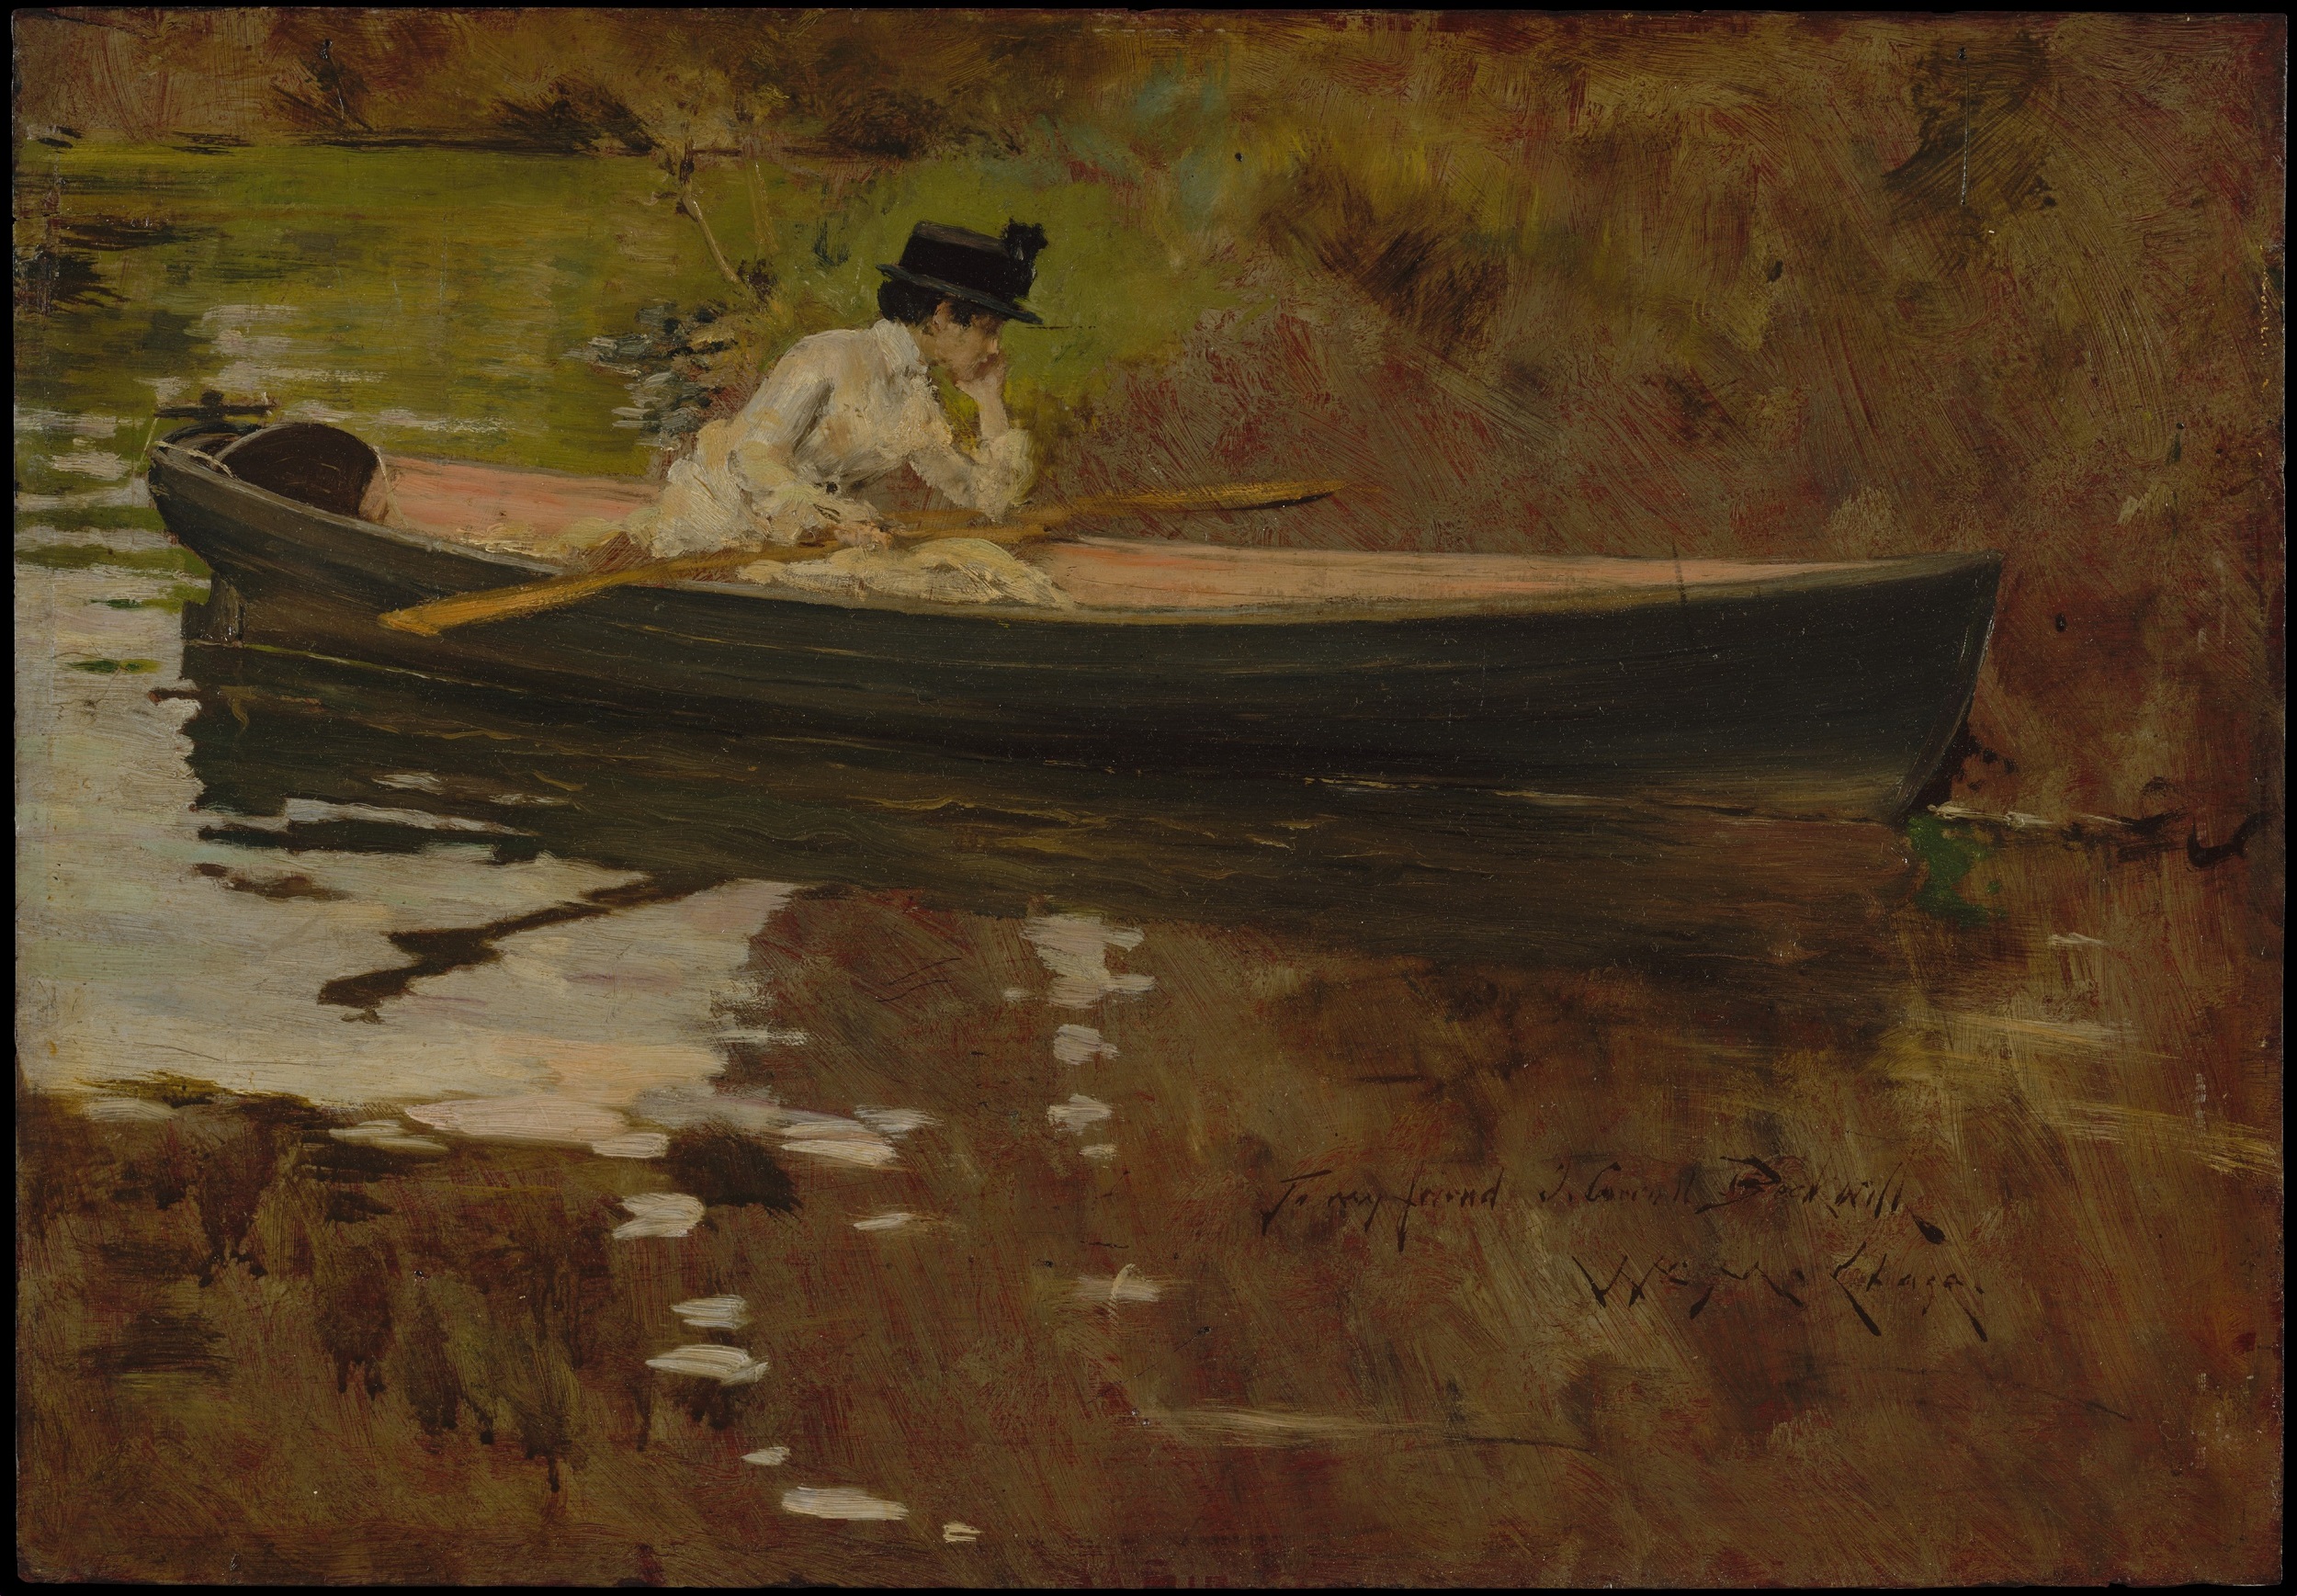 Oil painting of a woman in a rowboat surrounded by grasses and bush; no horizon line is visible. The woman wears a white dress and black hat and leans her chin on one hand.